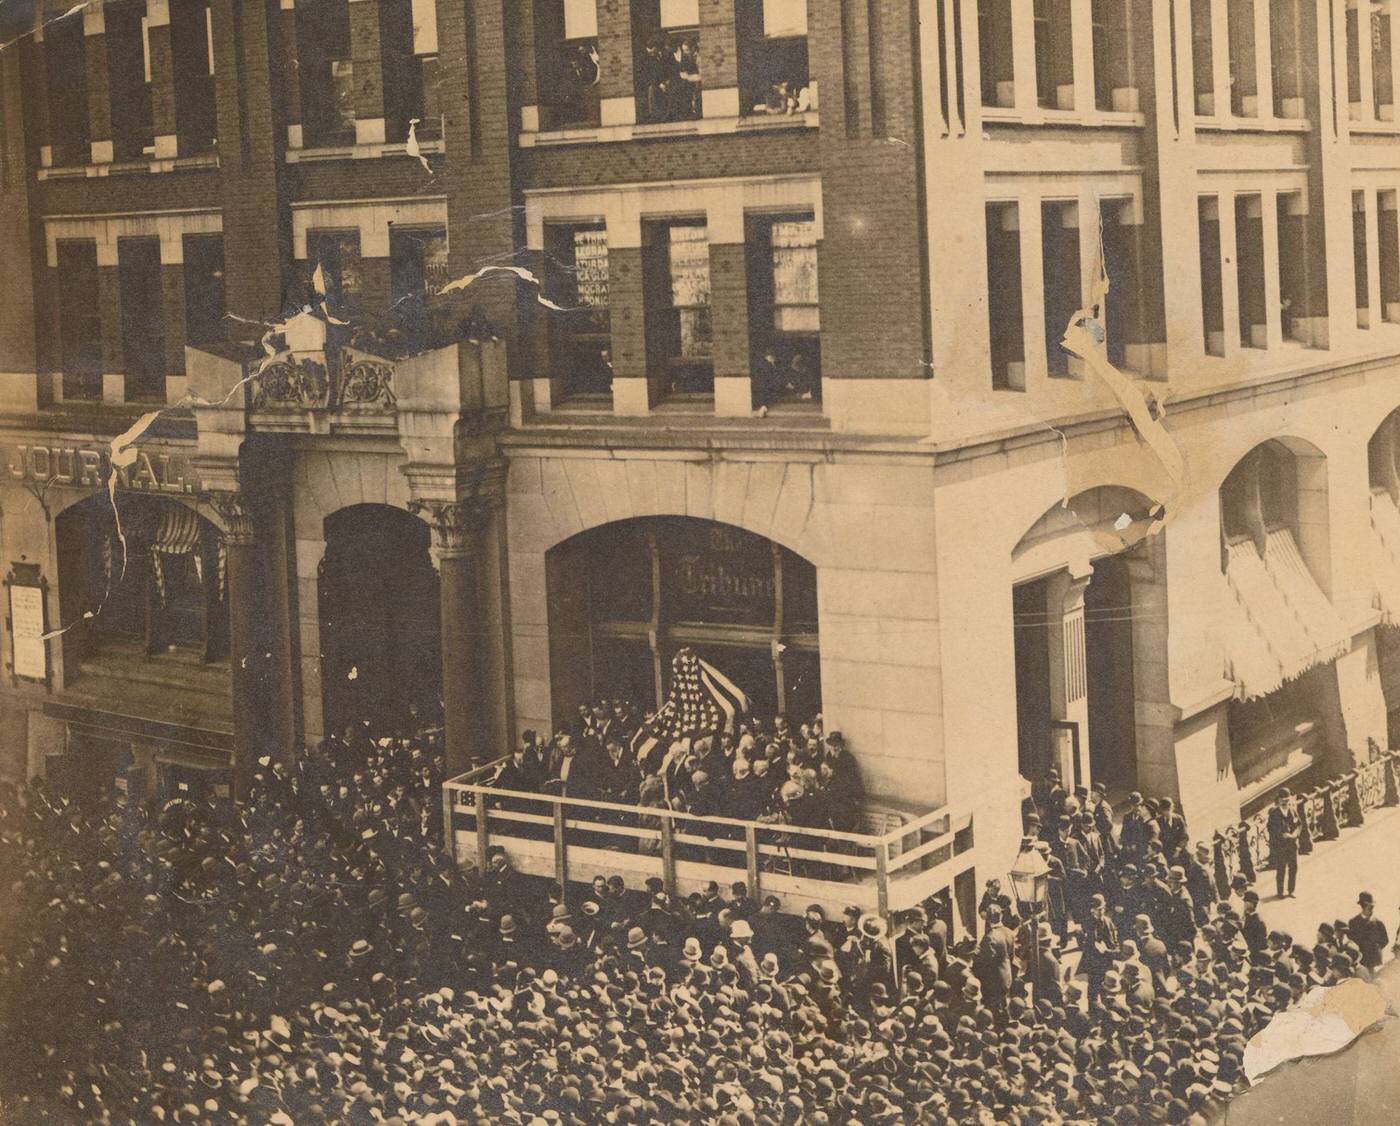 Unveiling Of The Statue Of Horace Greeley At The Tribune Building, 1860S.